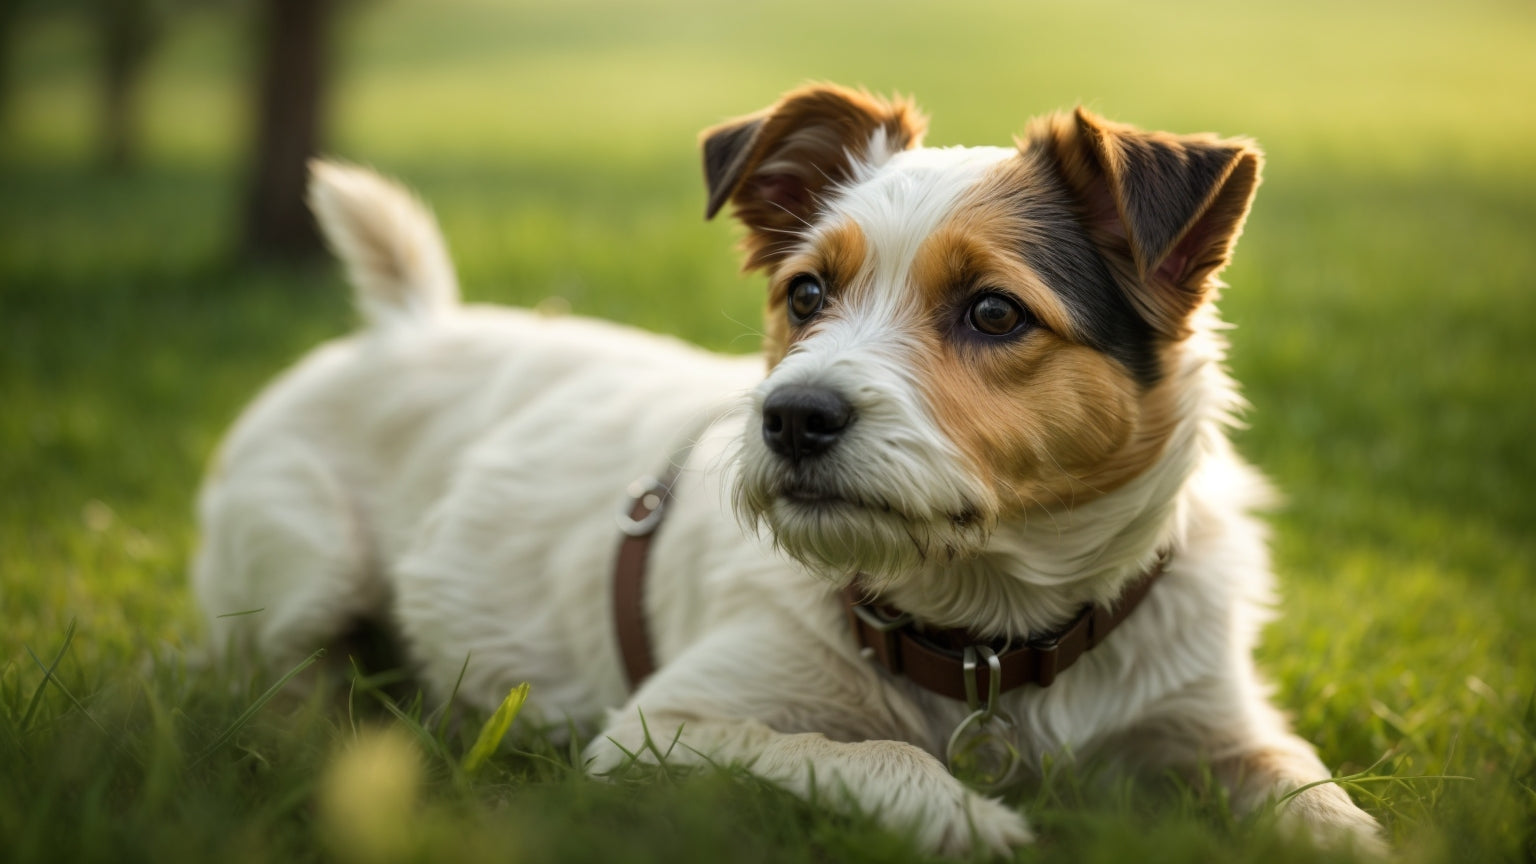 Parson Russell Terrier: Traits, Health, Diet and Care